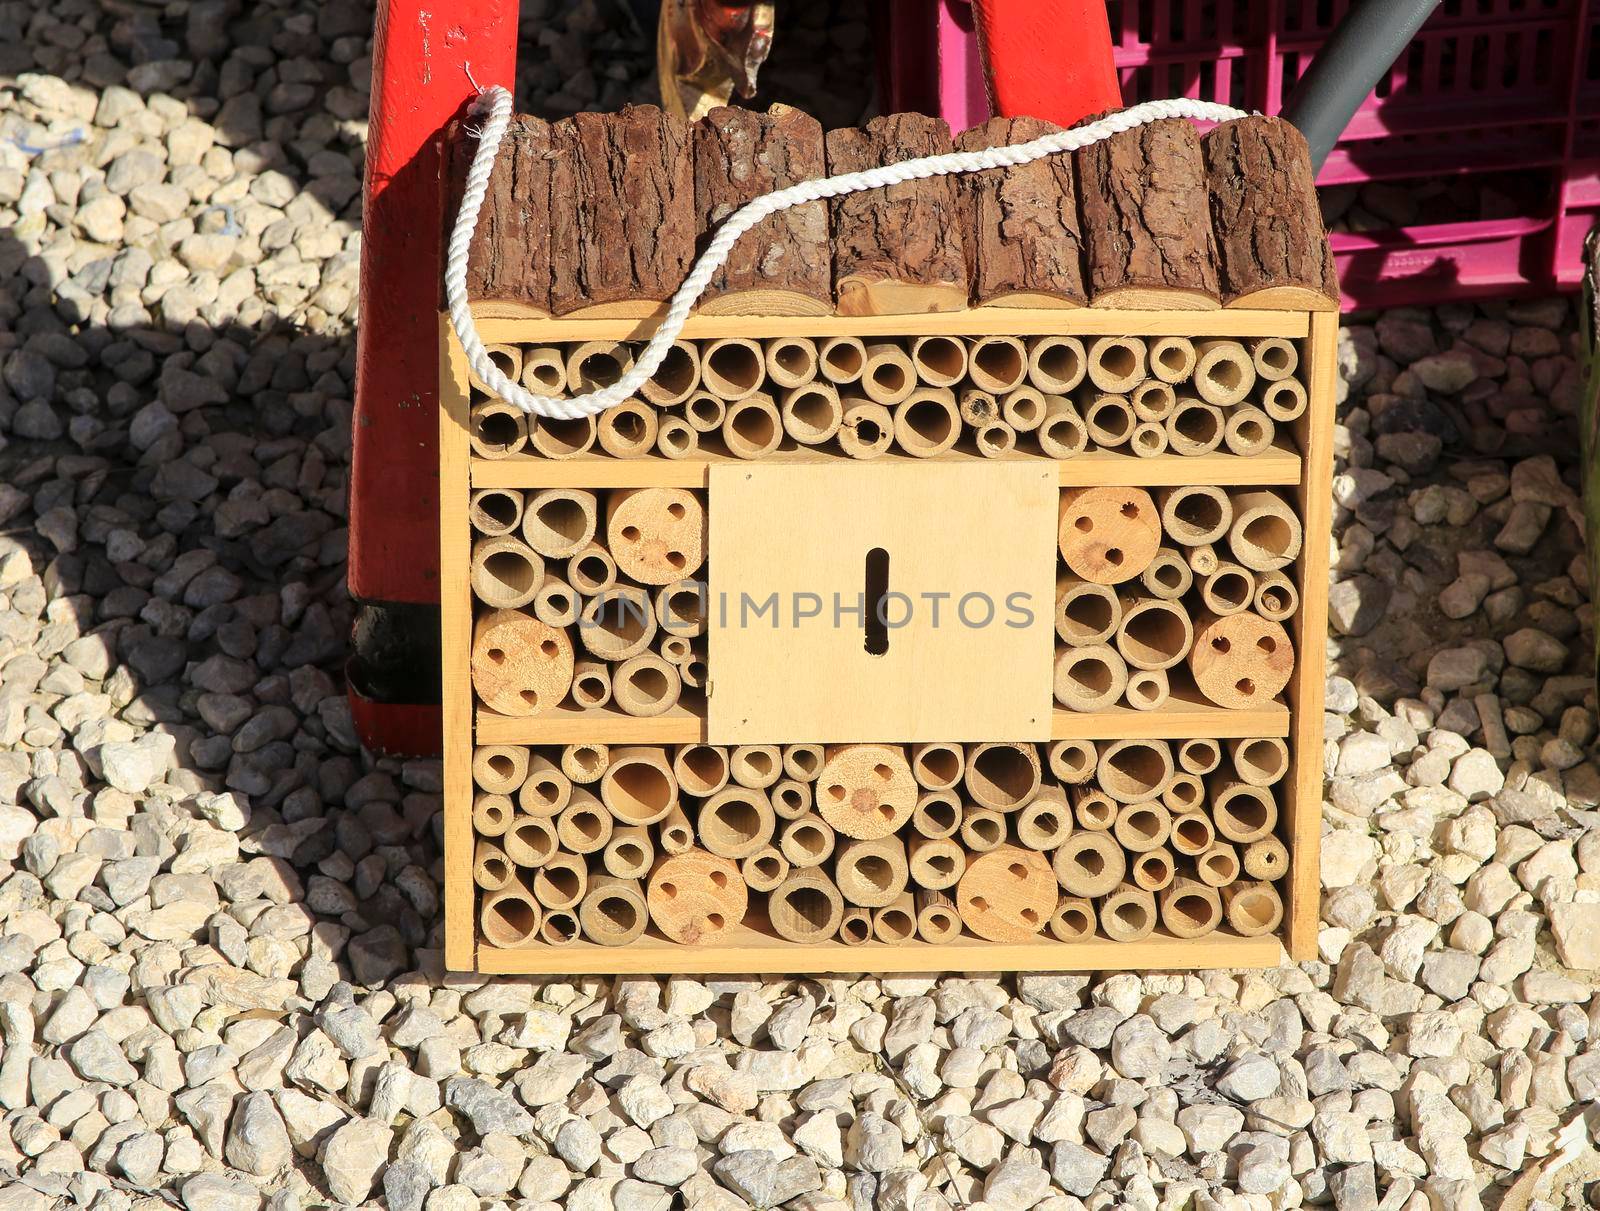 Insect hotel or bug hotel for sale at a market stall